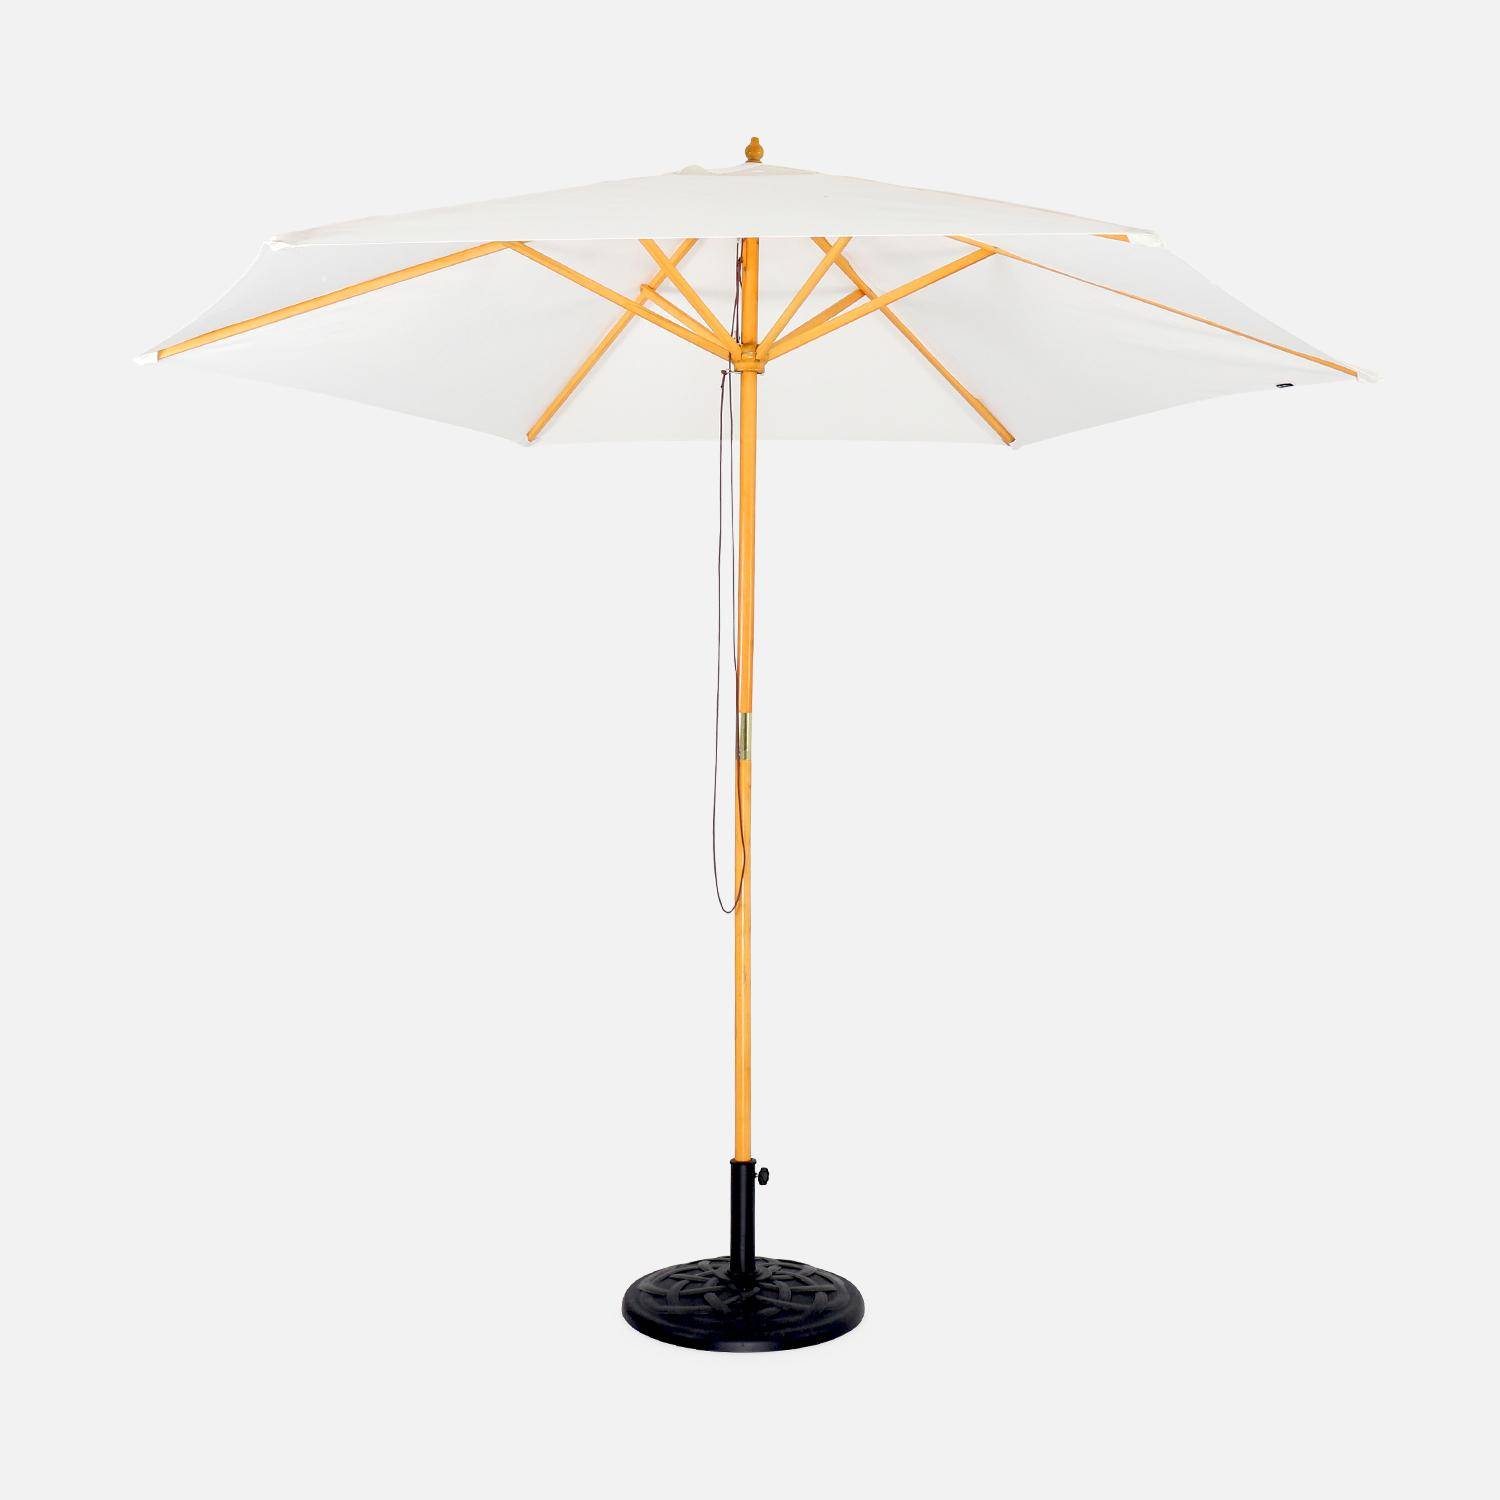 Round wooden parasol Ø300cm with straight pole -  adjustable aluminium central mast in wood and crank handle opening - Cabourg - Off-white,sweeek,Photo1